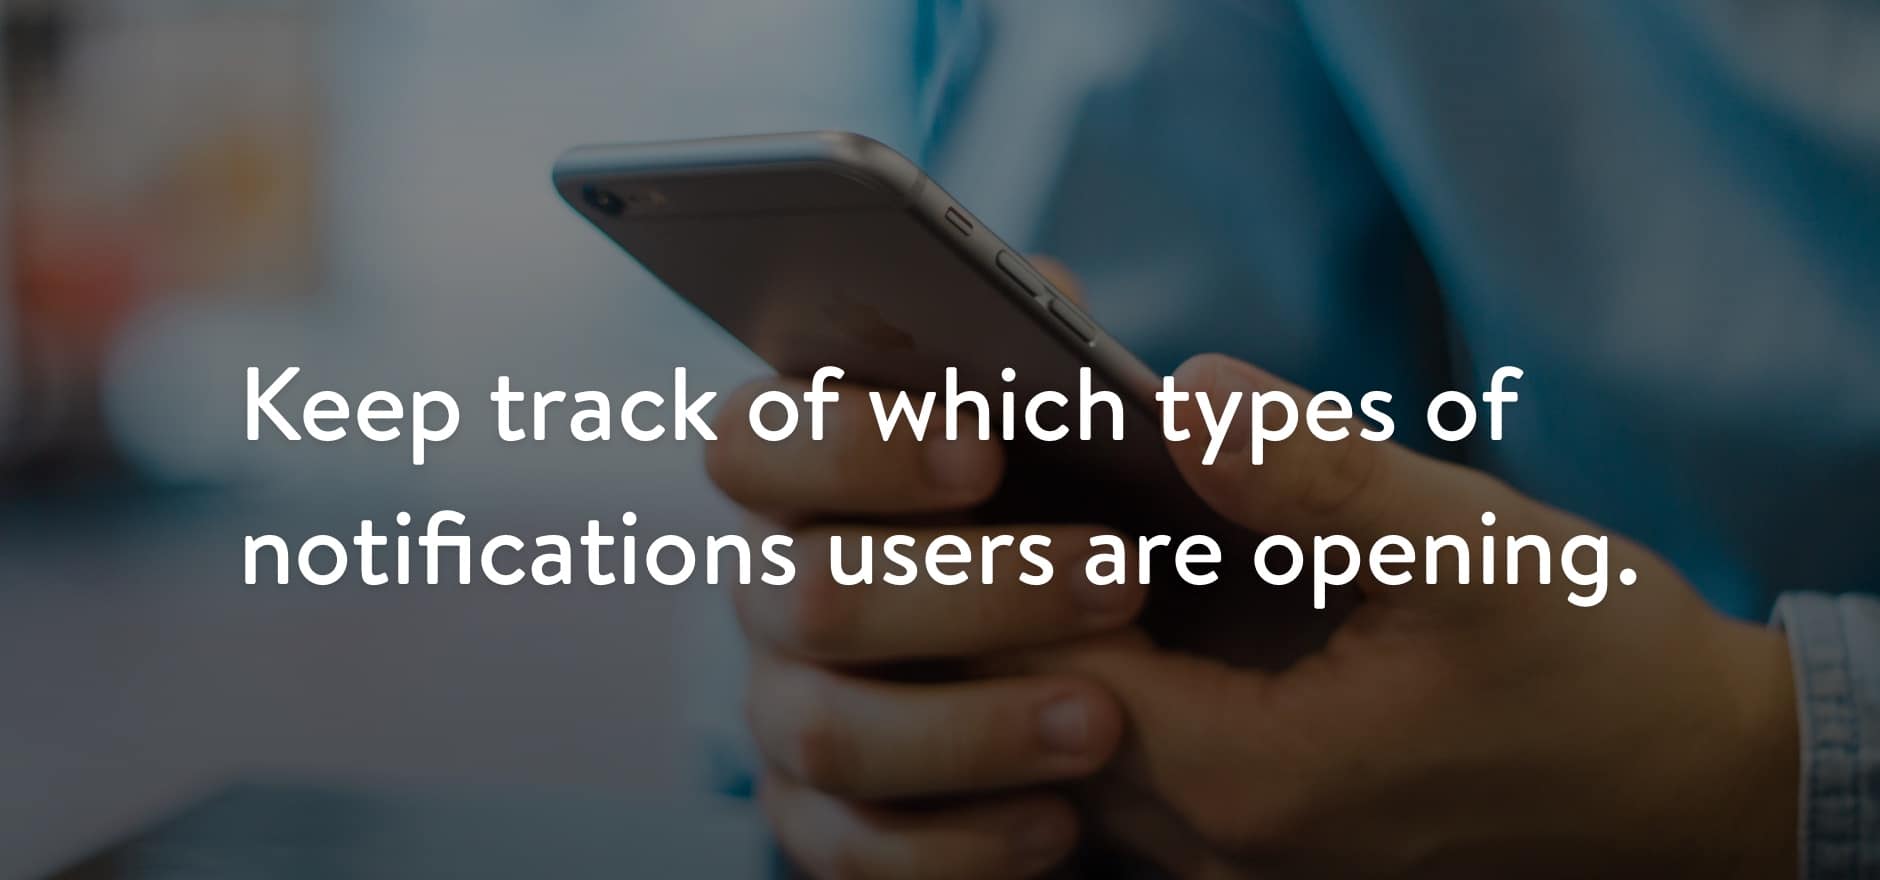 Keep track of which types of notifications users are opening.